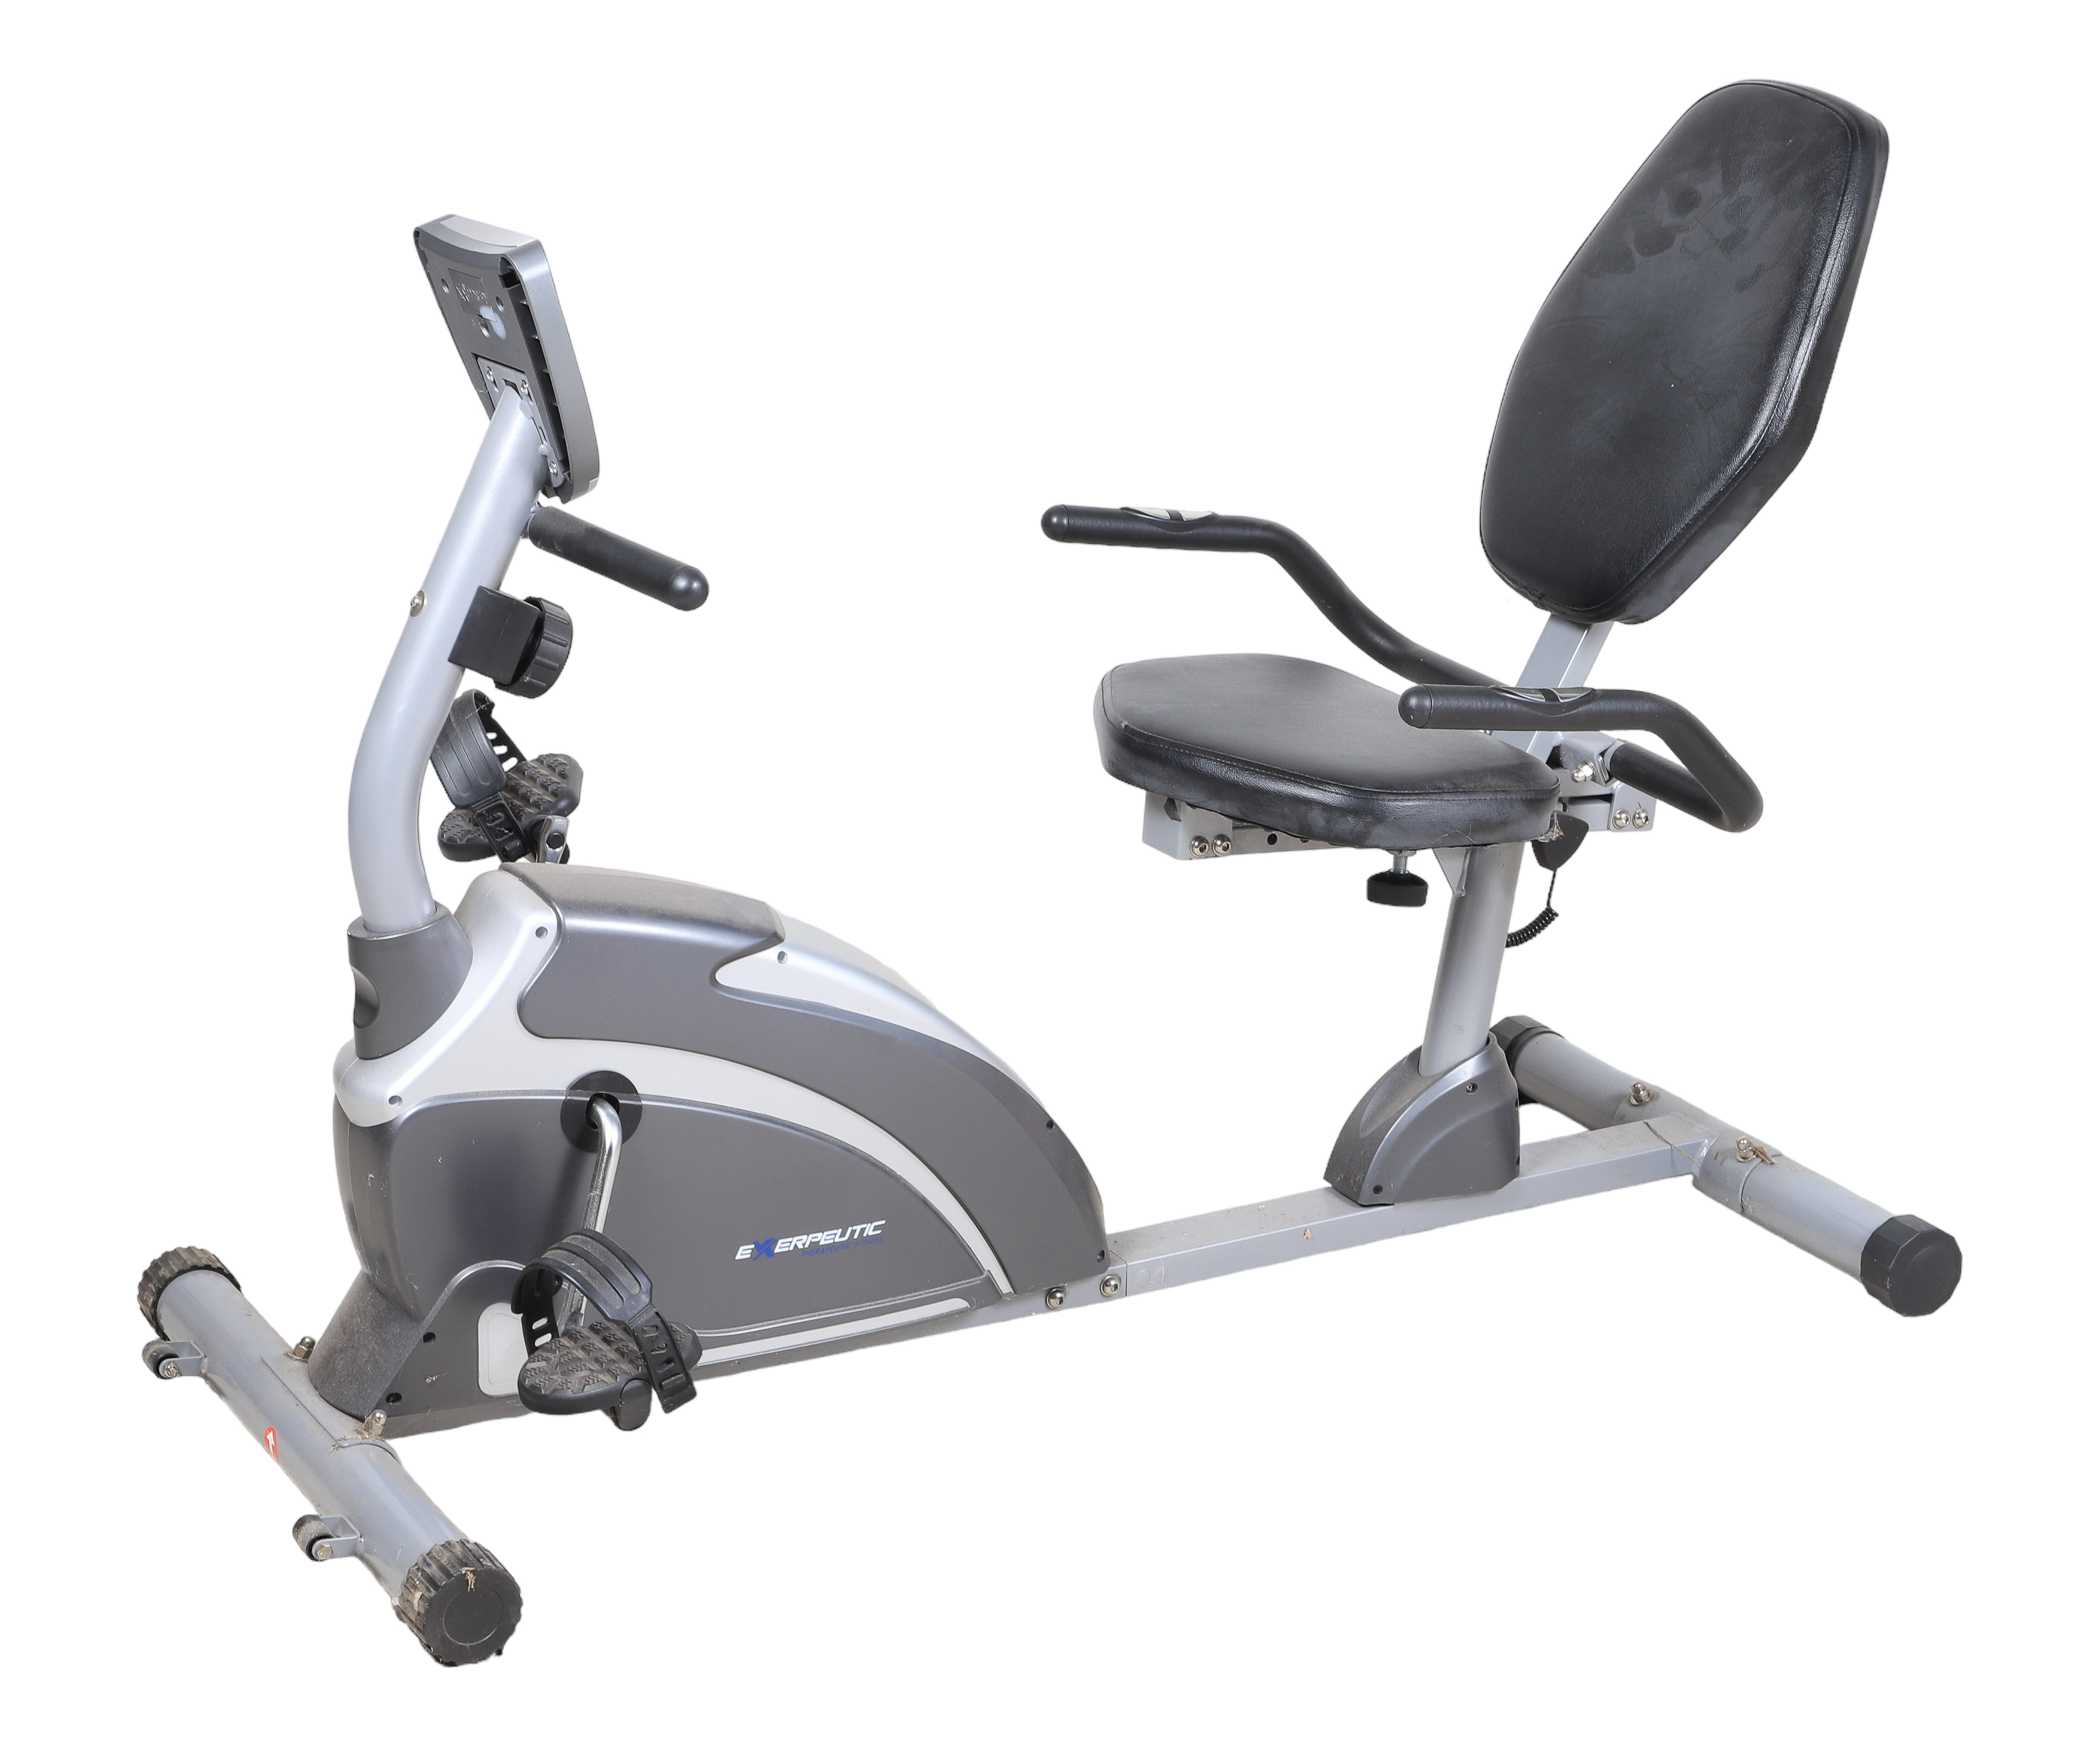 Exerpeutic stationary bike adjustable 2e1a53